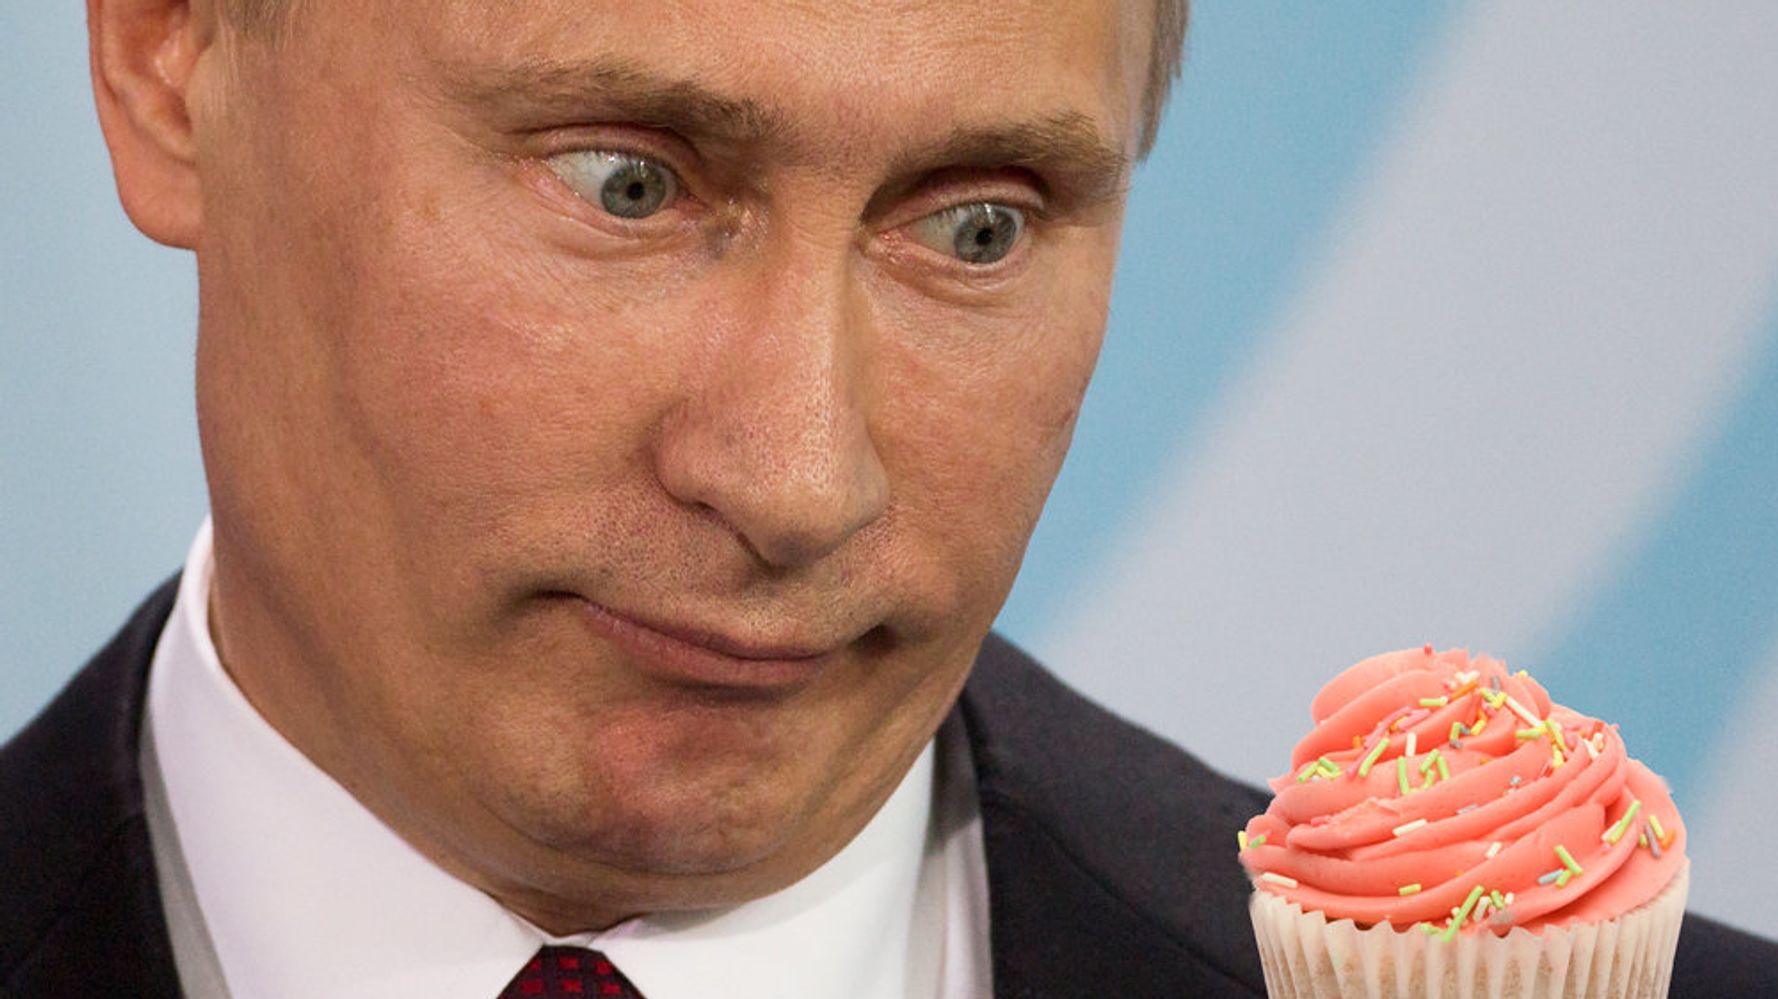 It's Putin's Birthday So Here Are 17 Photos Of Him With Cupcakes